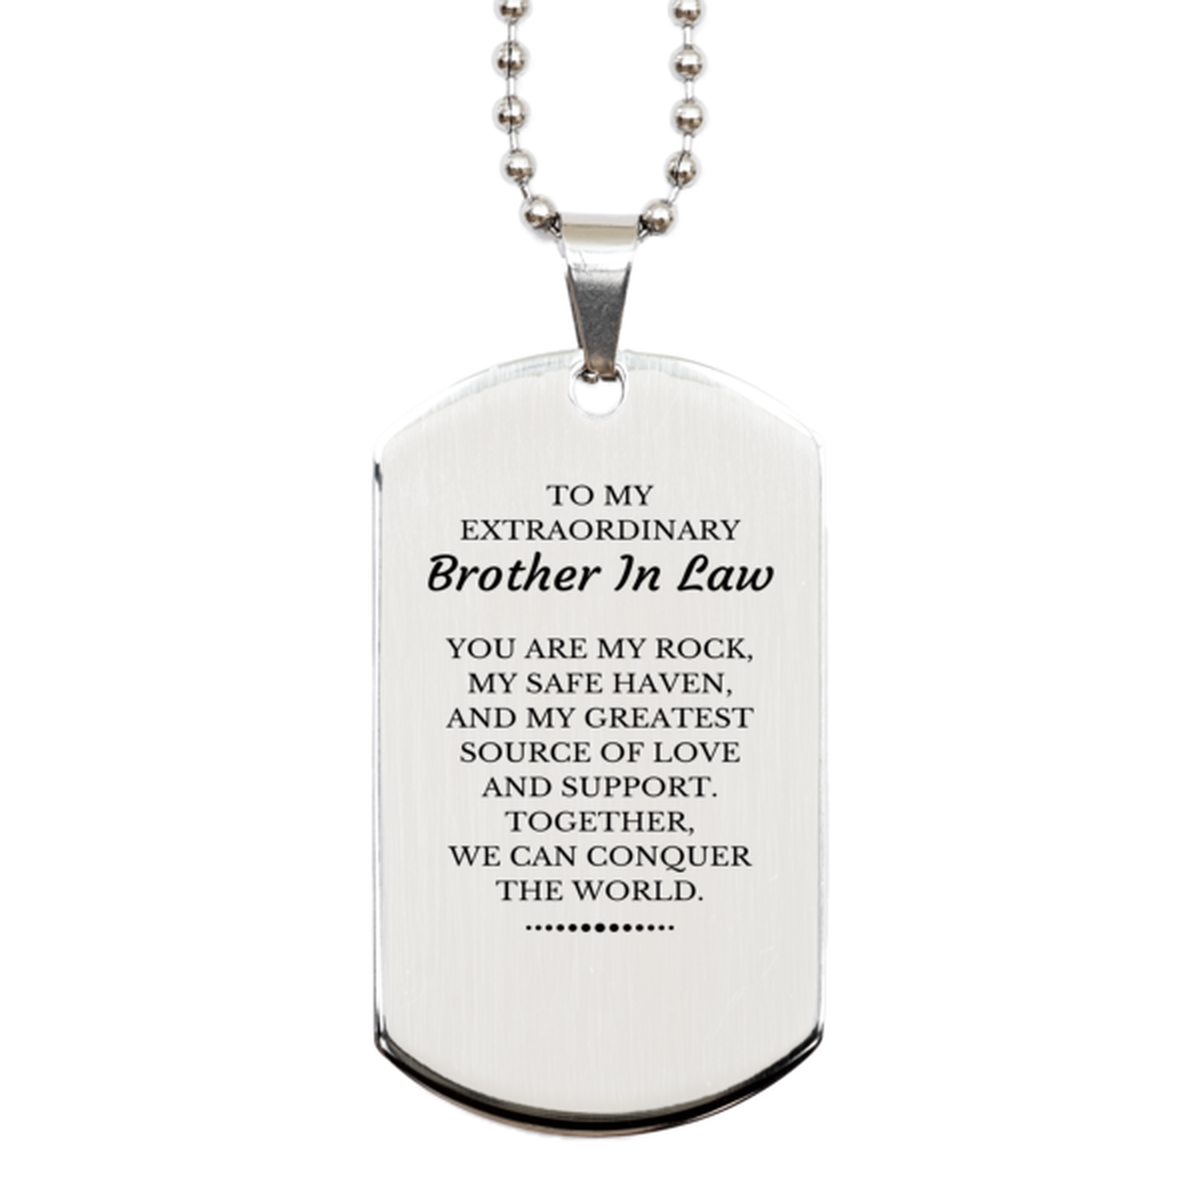 To My Extraordinary Brother In Law Gifts, Together, we can conquer the world, Birthday Silver Dog Tag For Brother In Law, Christmas Gifts For Brother In Law